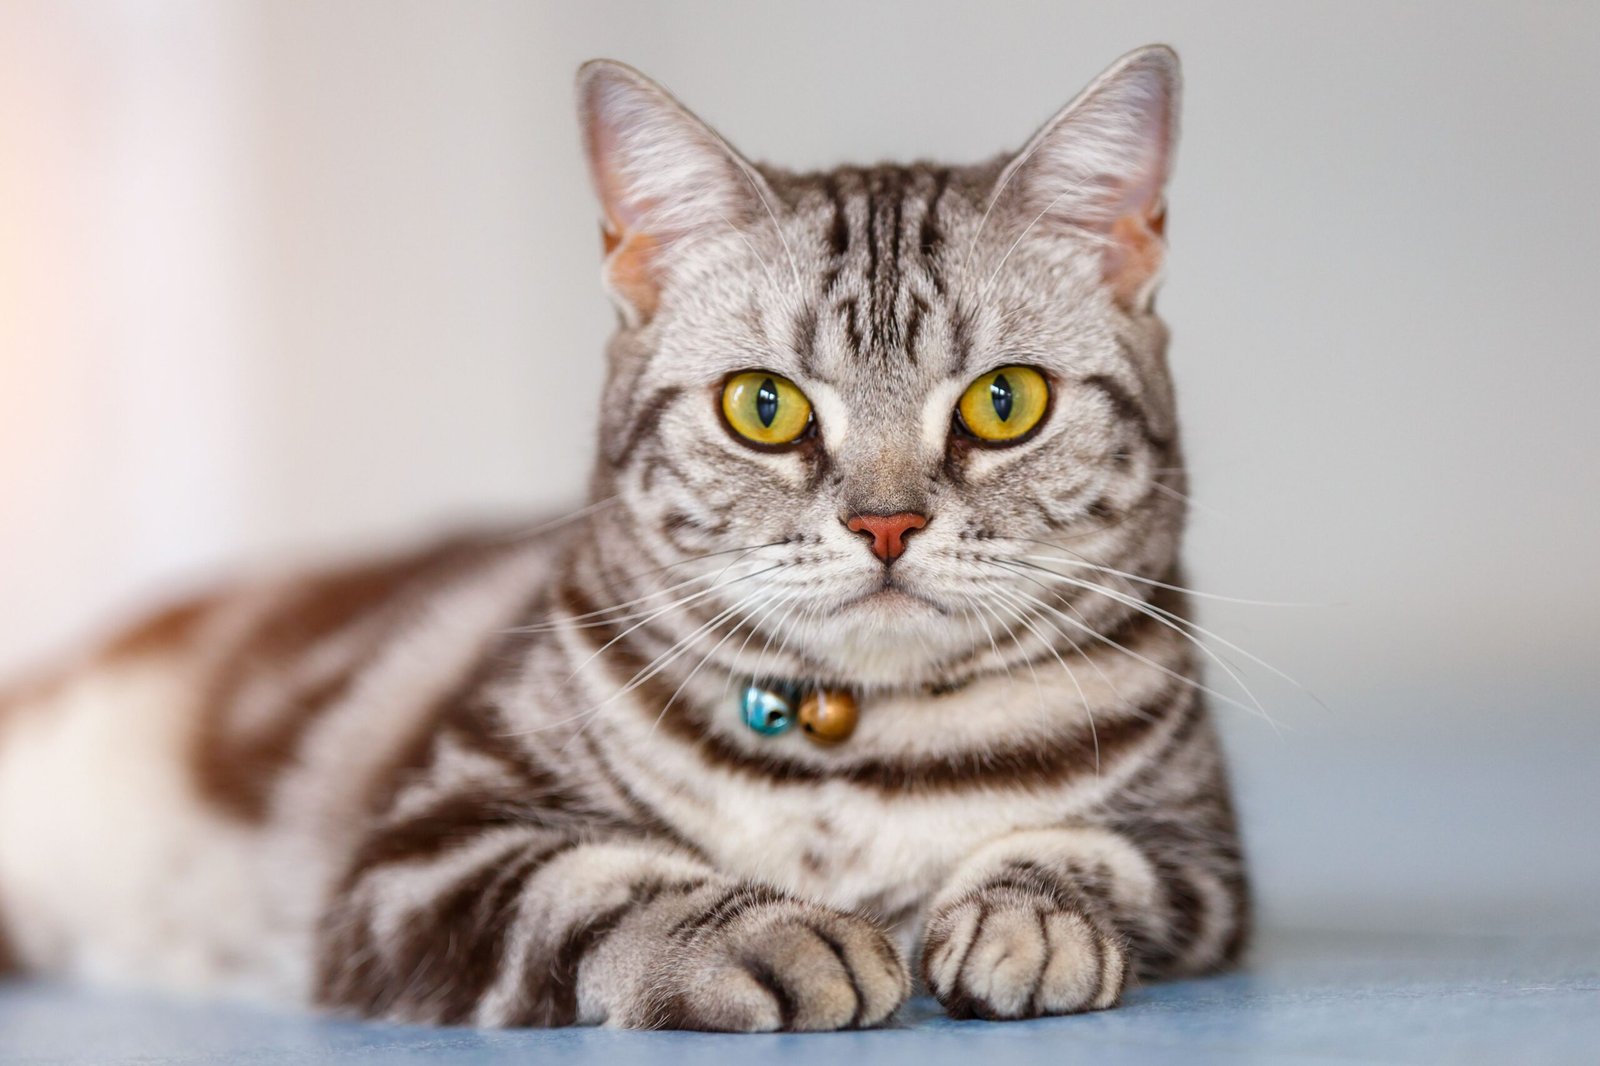 More Serious Reasons Why a Cat May Not Vocalize: Laryngeal Paralysis